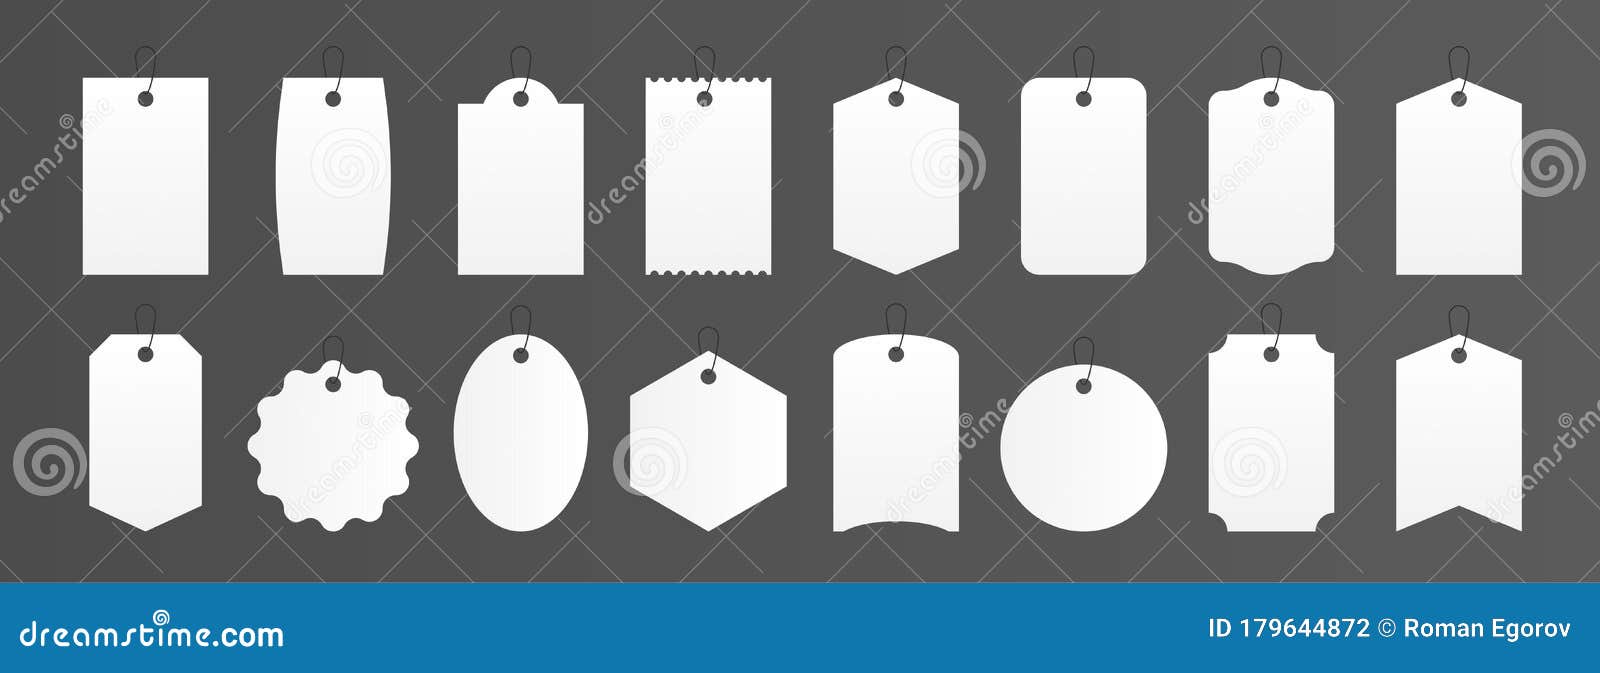 price tags. realistic square and round gift box labels, white blank luggage sticker mockup.  paper product label